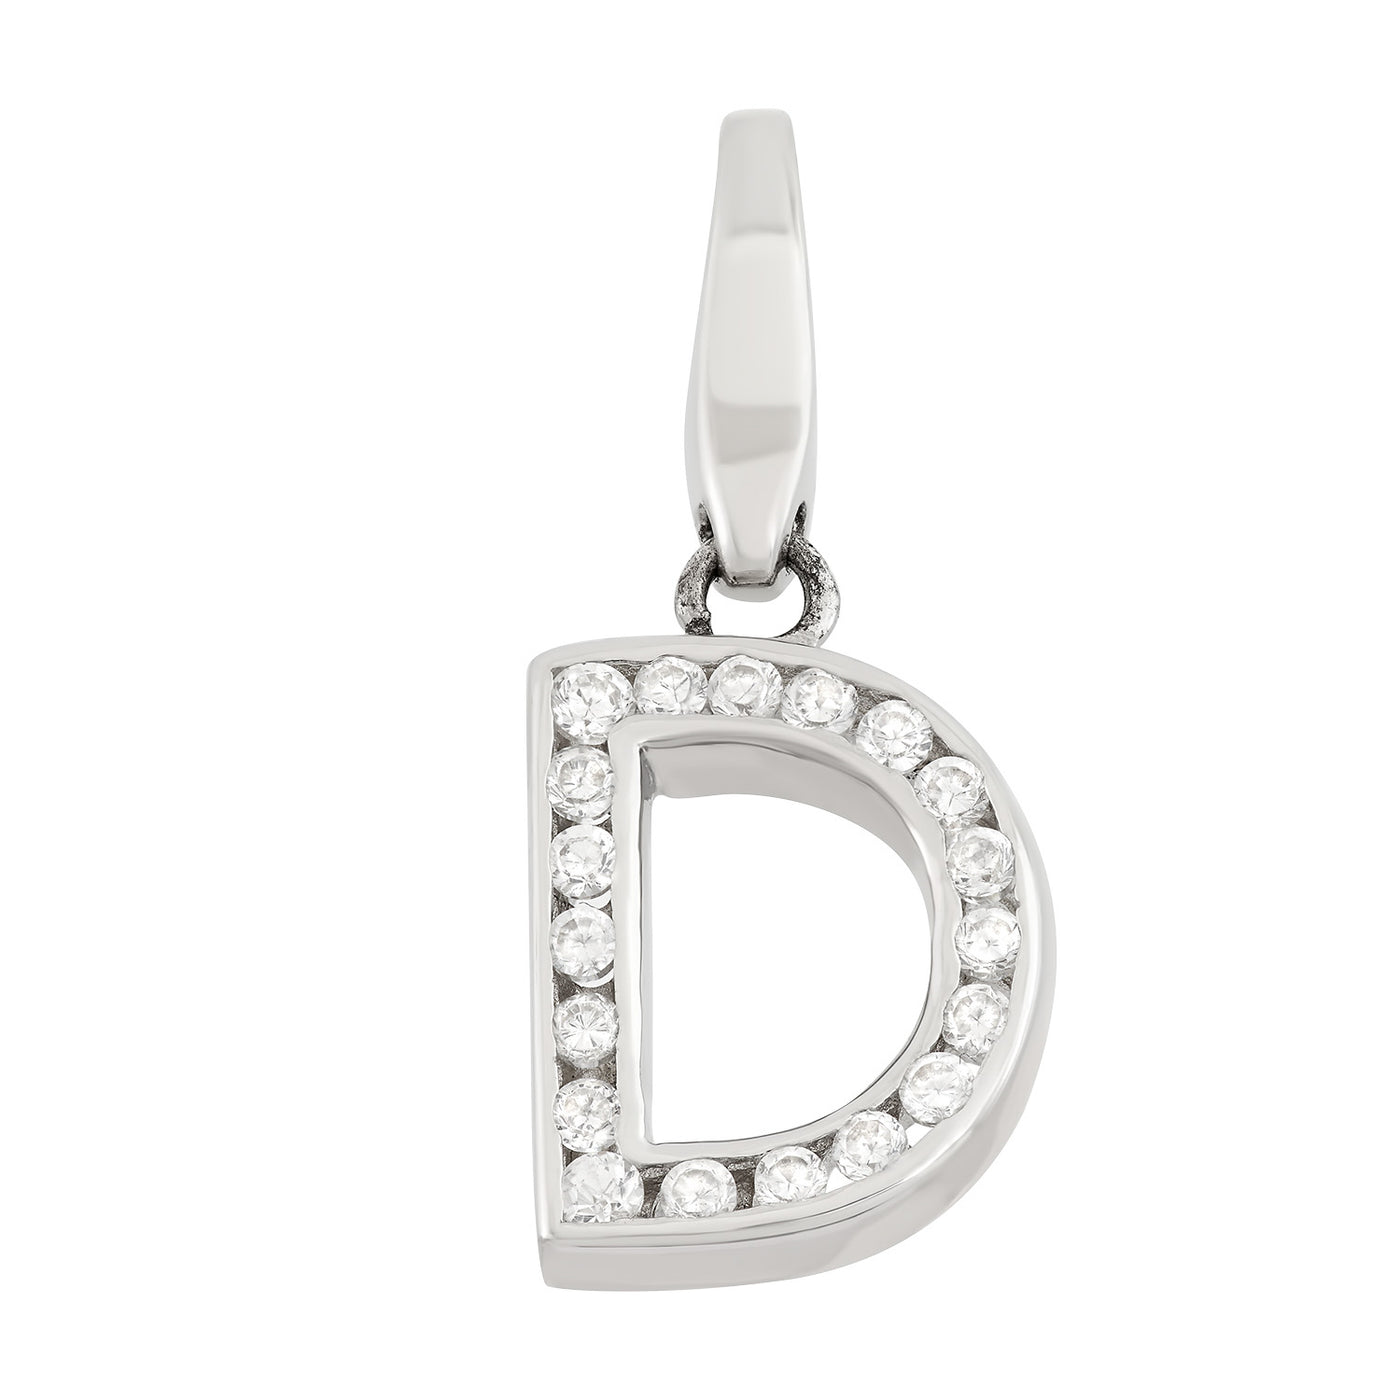 Rebecca Sloane Sterling Silver "D" With Cz Charm